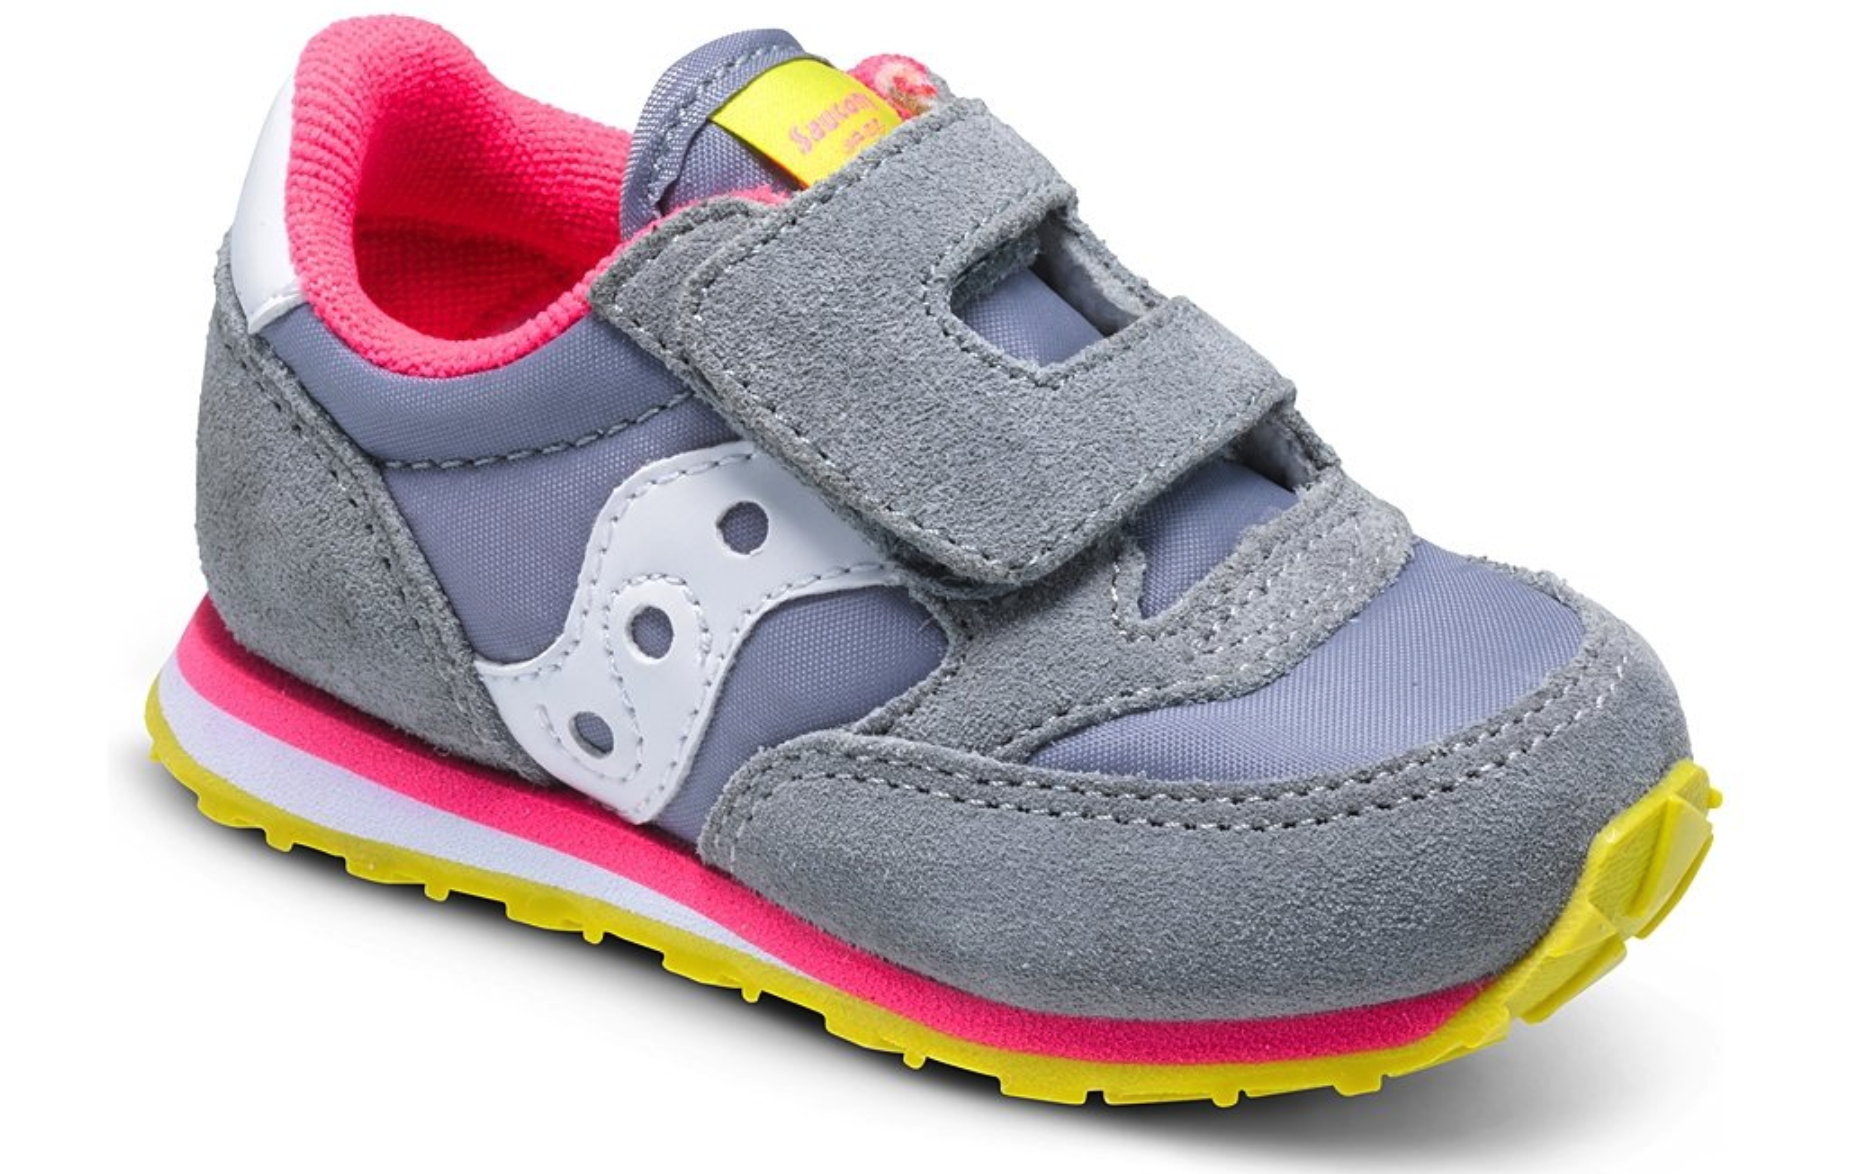 saucony baby shoes review